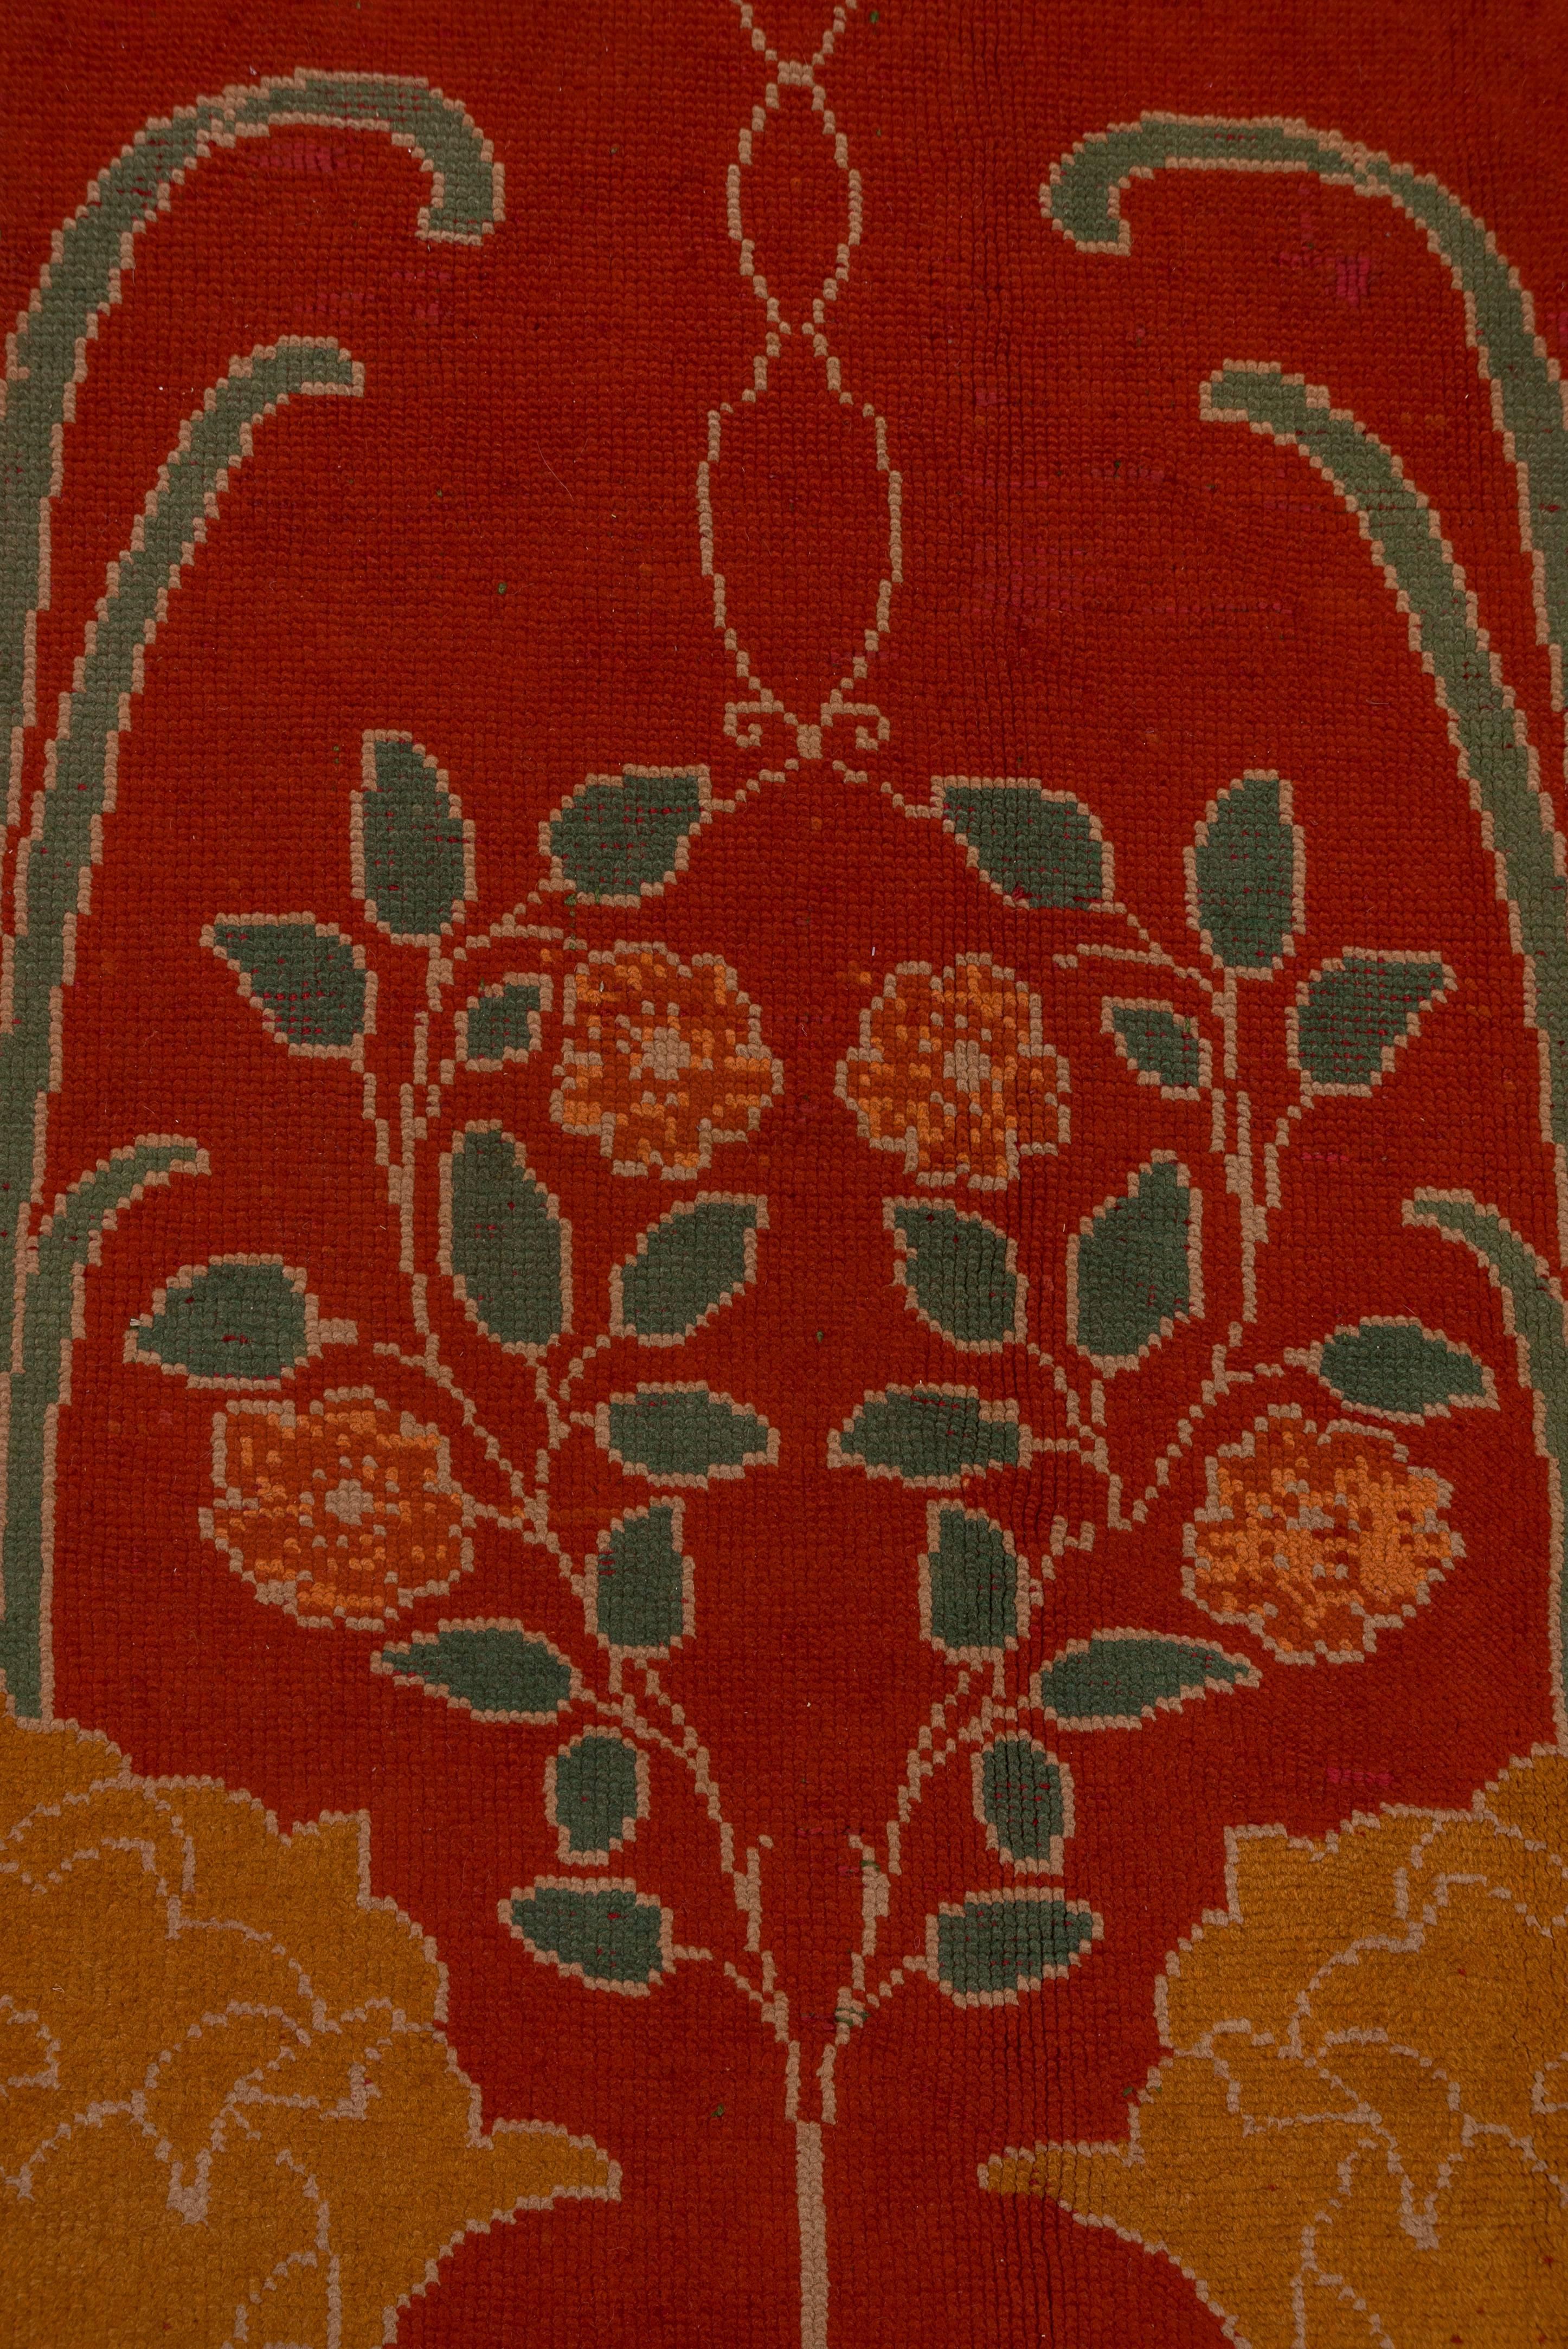 Hand-Knotted Donegal Carpet, circa 1900